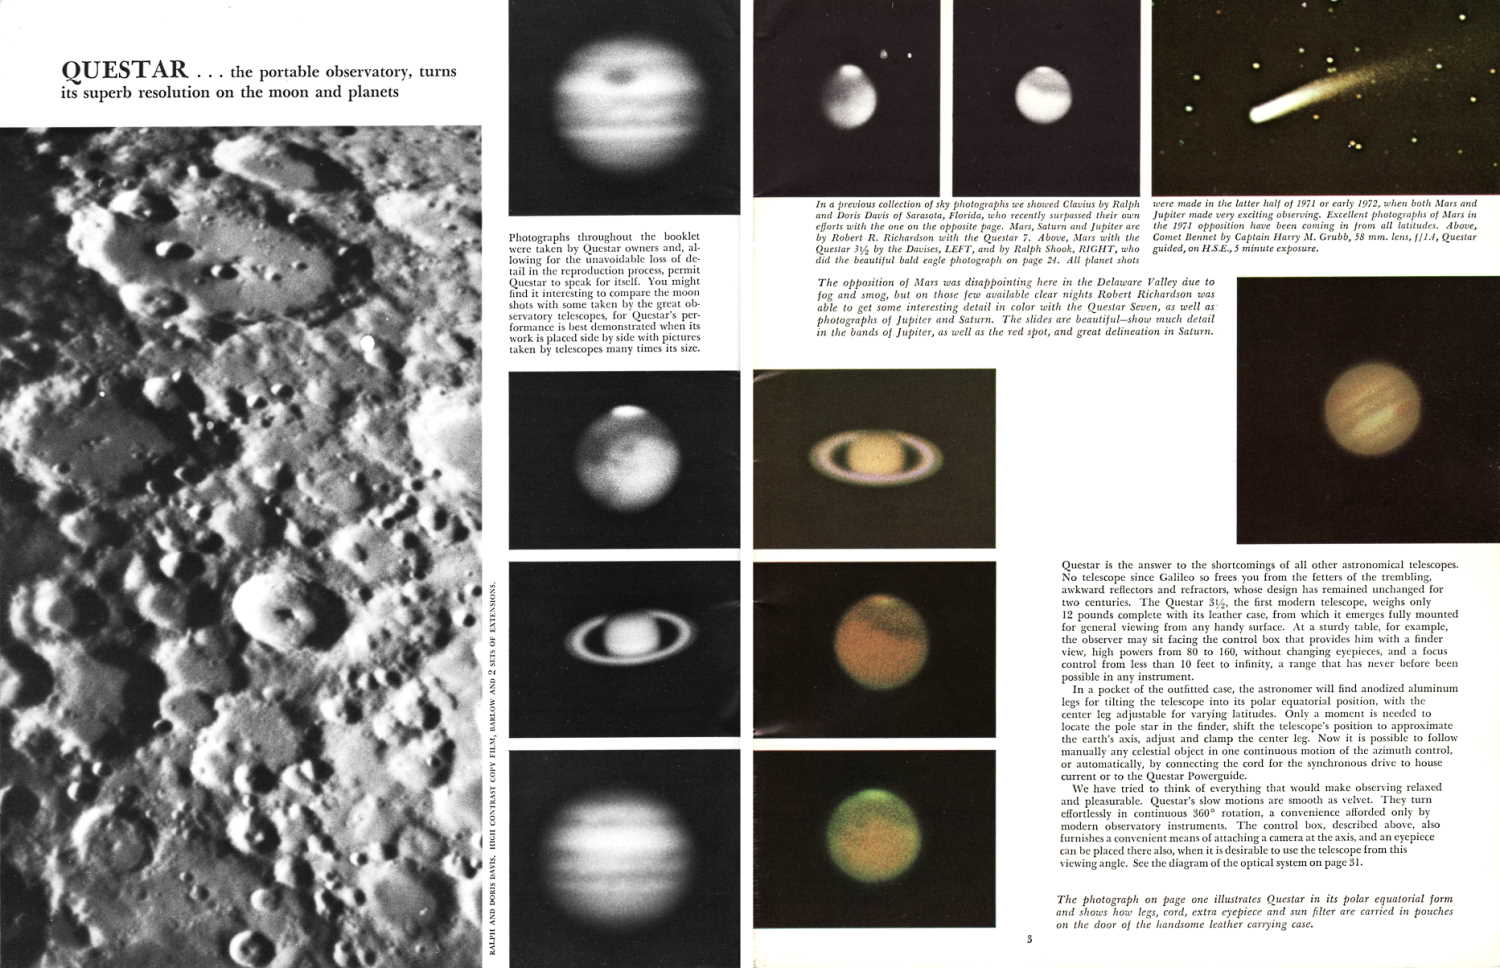 Photographs of the Moon and the planets in the 1972 Questar booklet